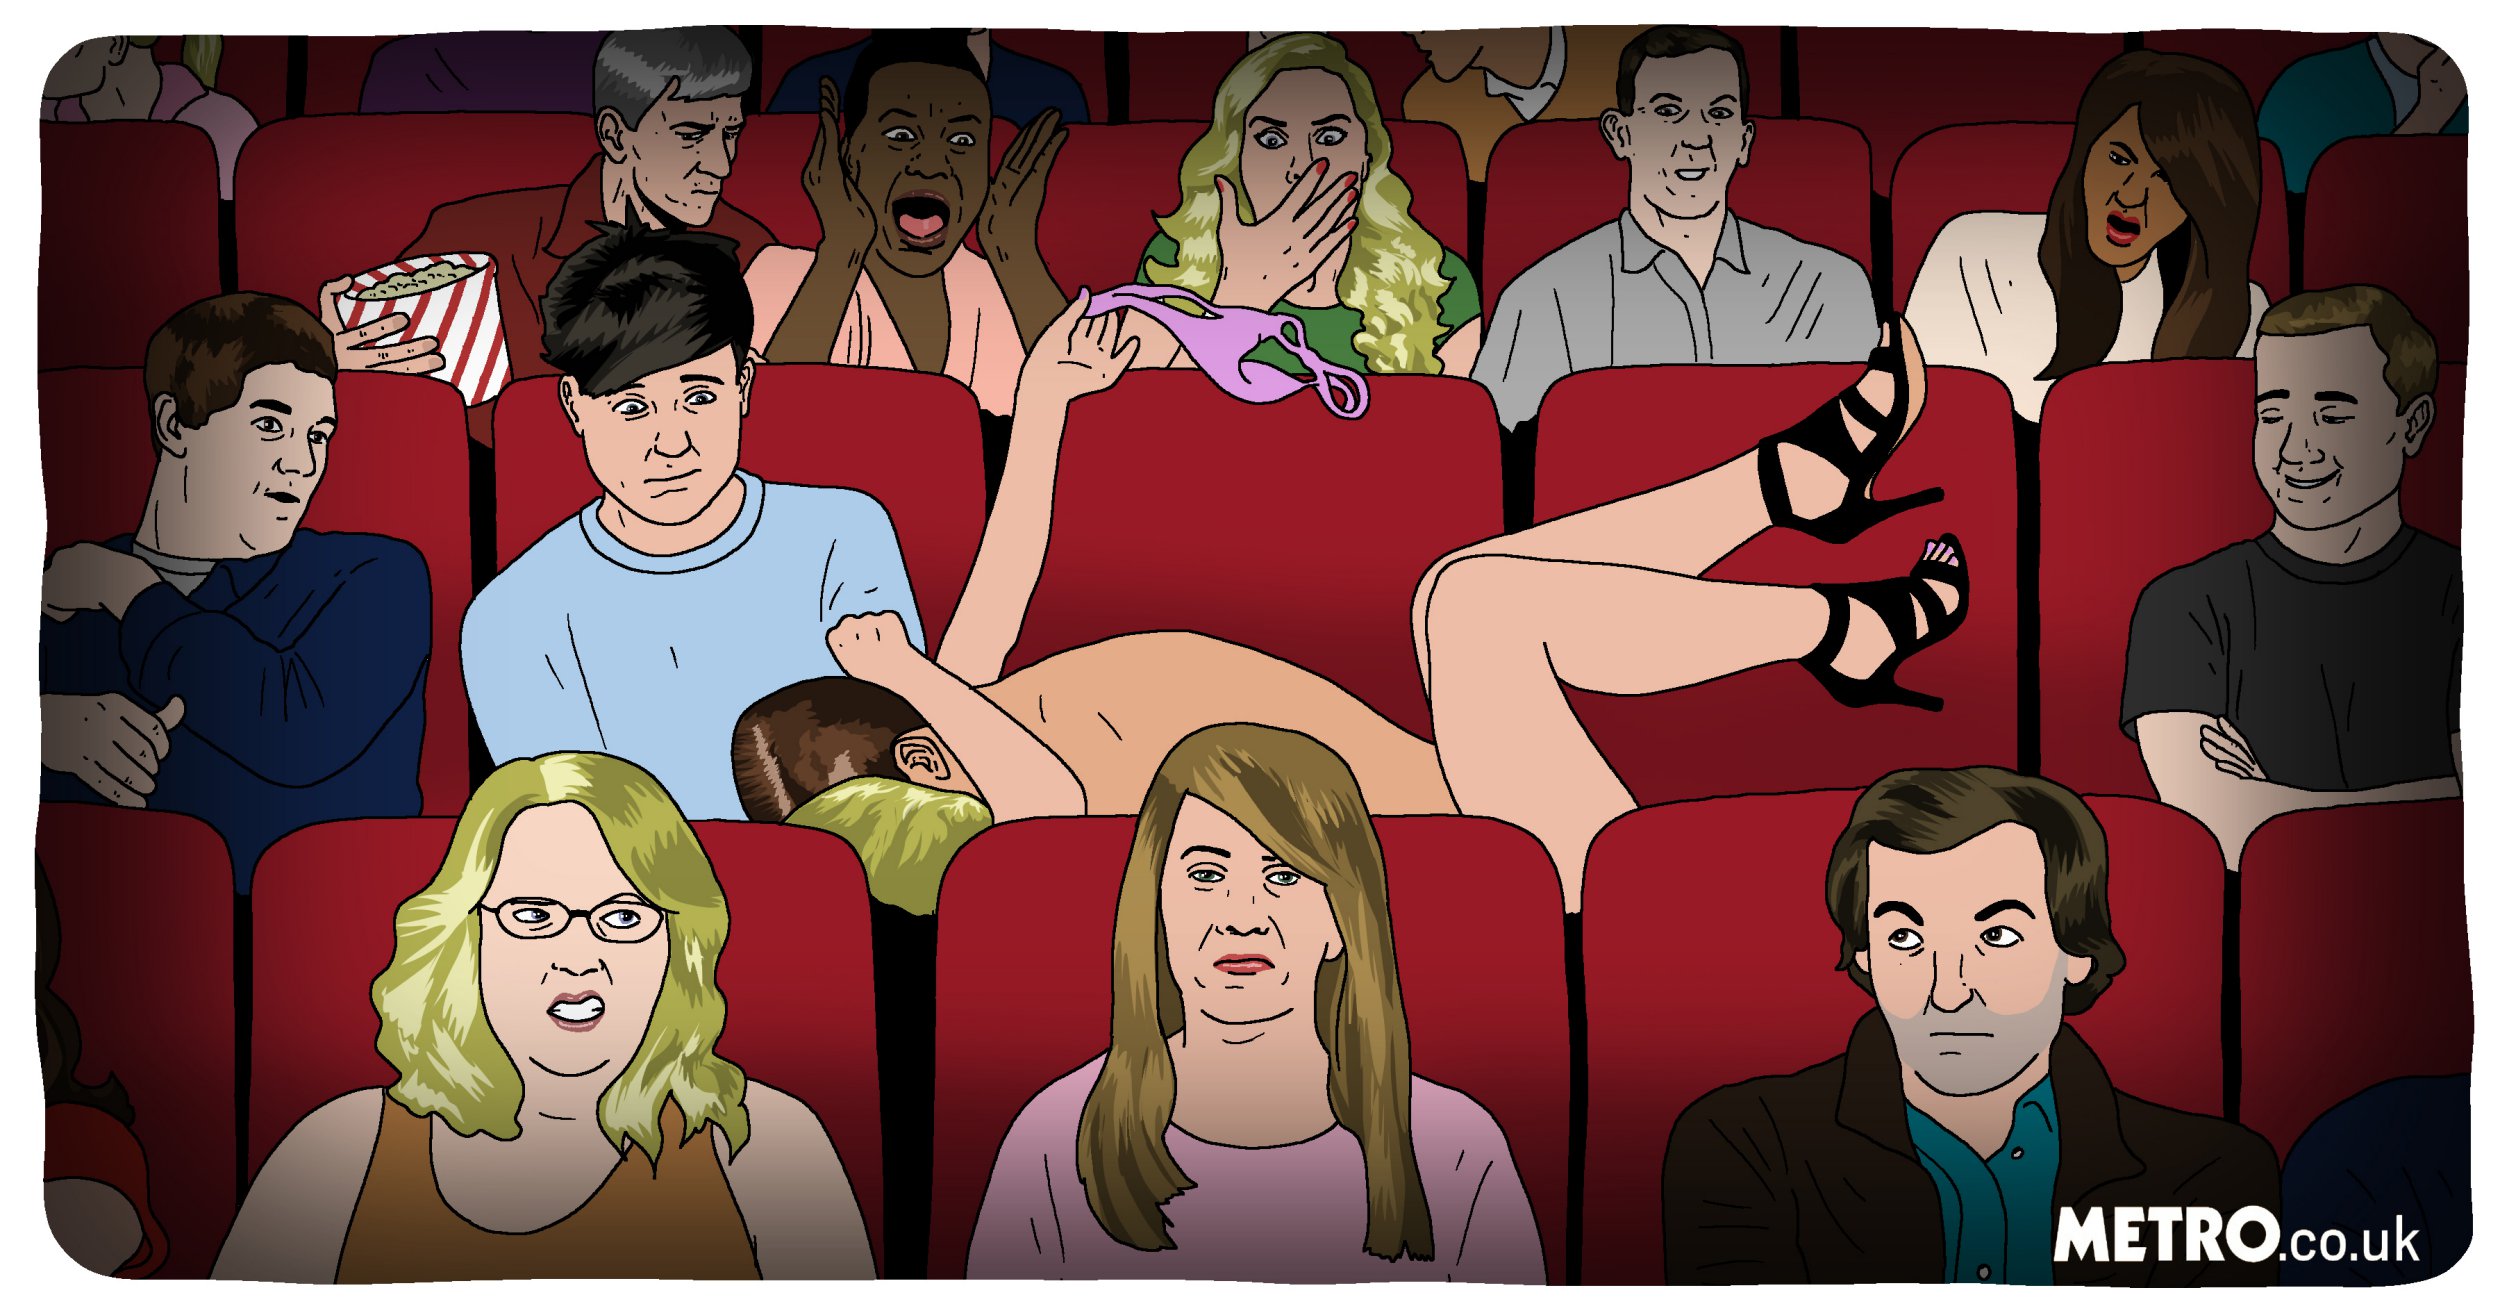 dara oliver recommends how to have sex in the movie theater pic